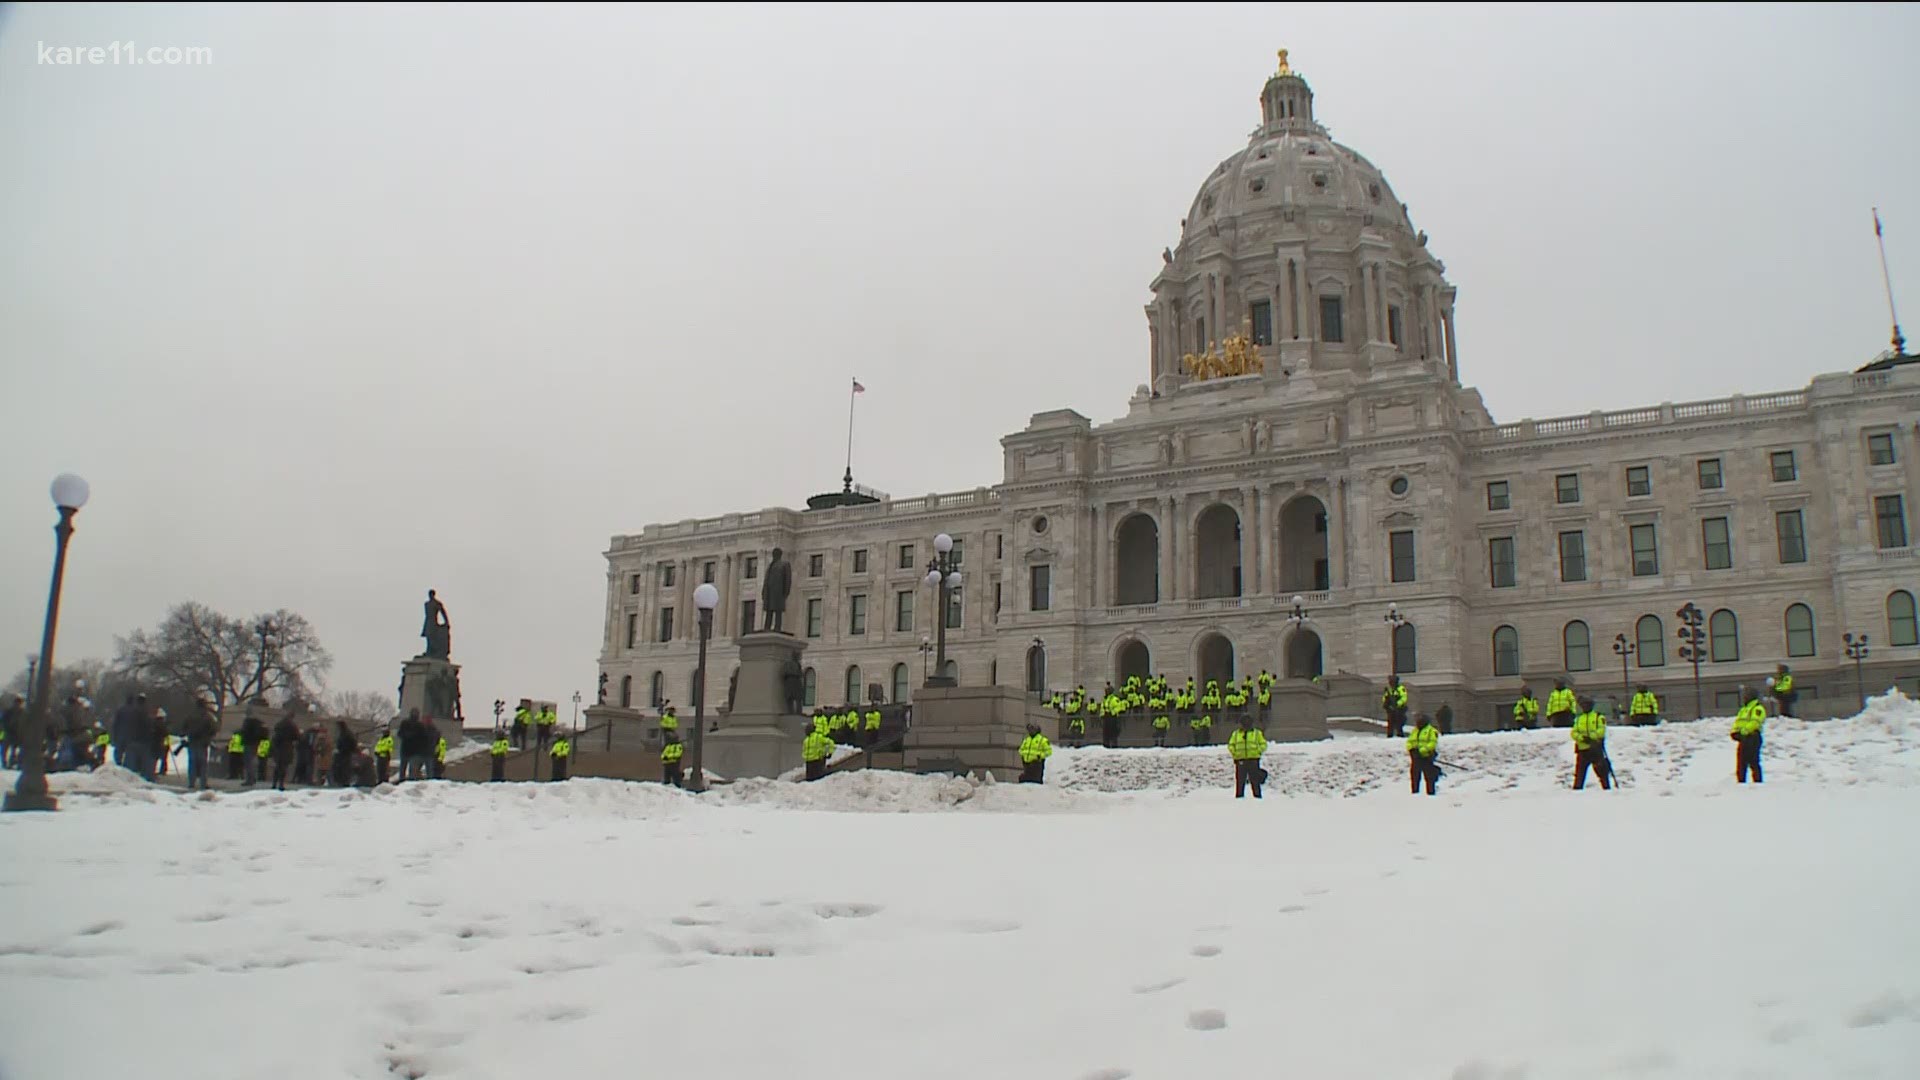 State troopers and members of the National Guard  could be seen around the Minnesota State Capitol complex.